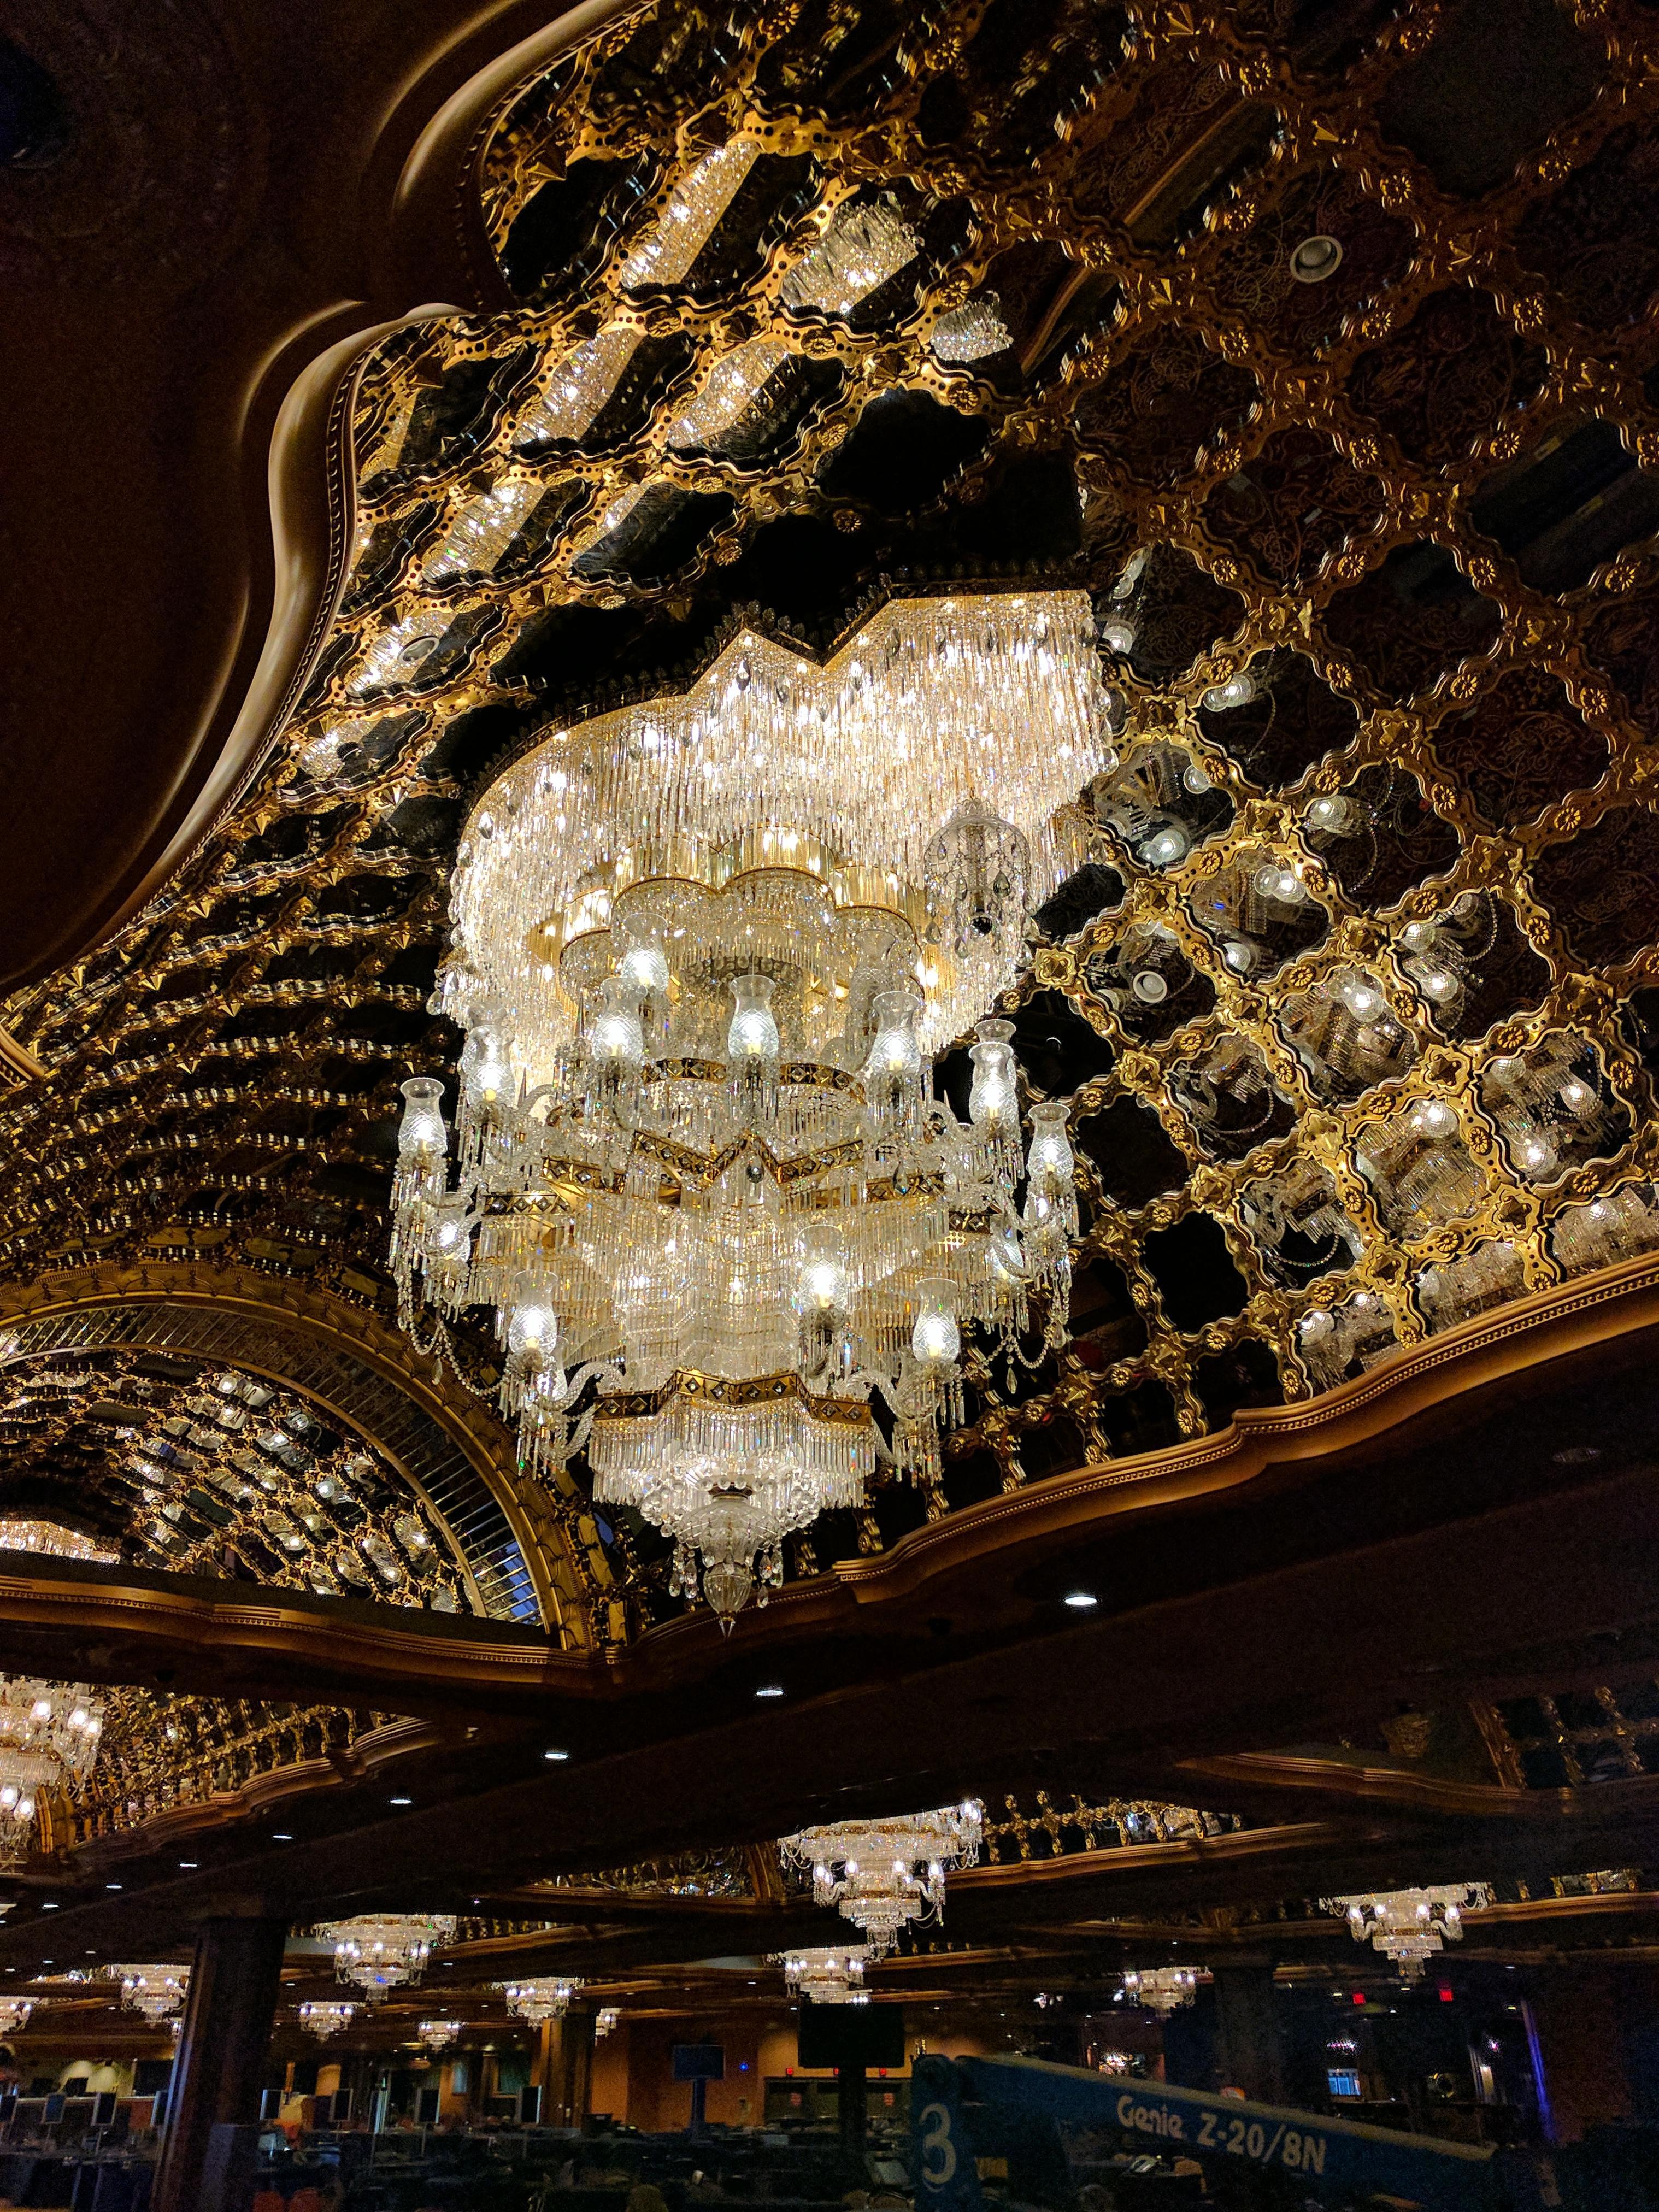 This magnificent chandelier was one of twenty commissioned for the casino at the Taj Mahal Casino in Atlantic City at a cost of 800000.00 EACH (almost 1.7 million today)  in the late 1980s. it was manufactured by Faustig featuring Swarovski Strass